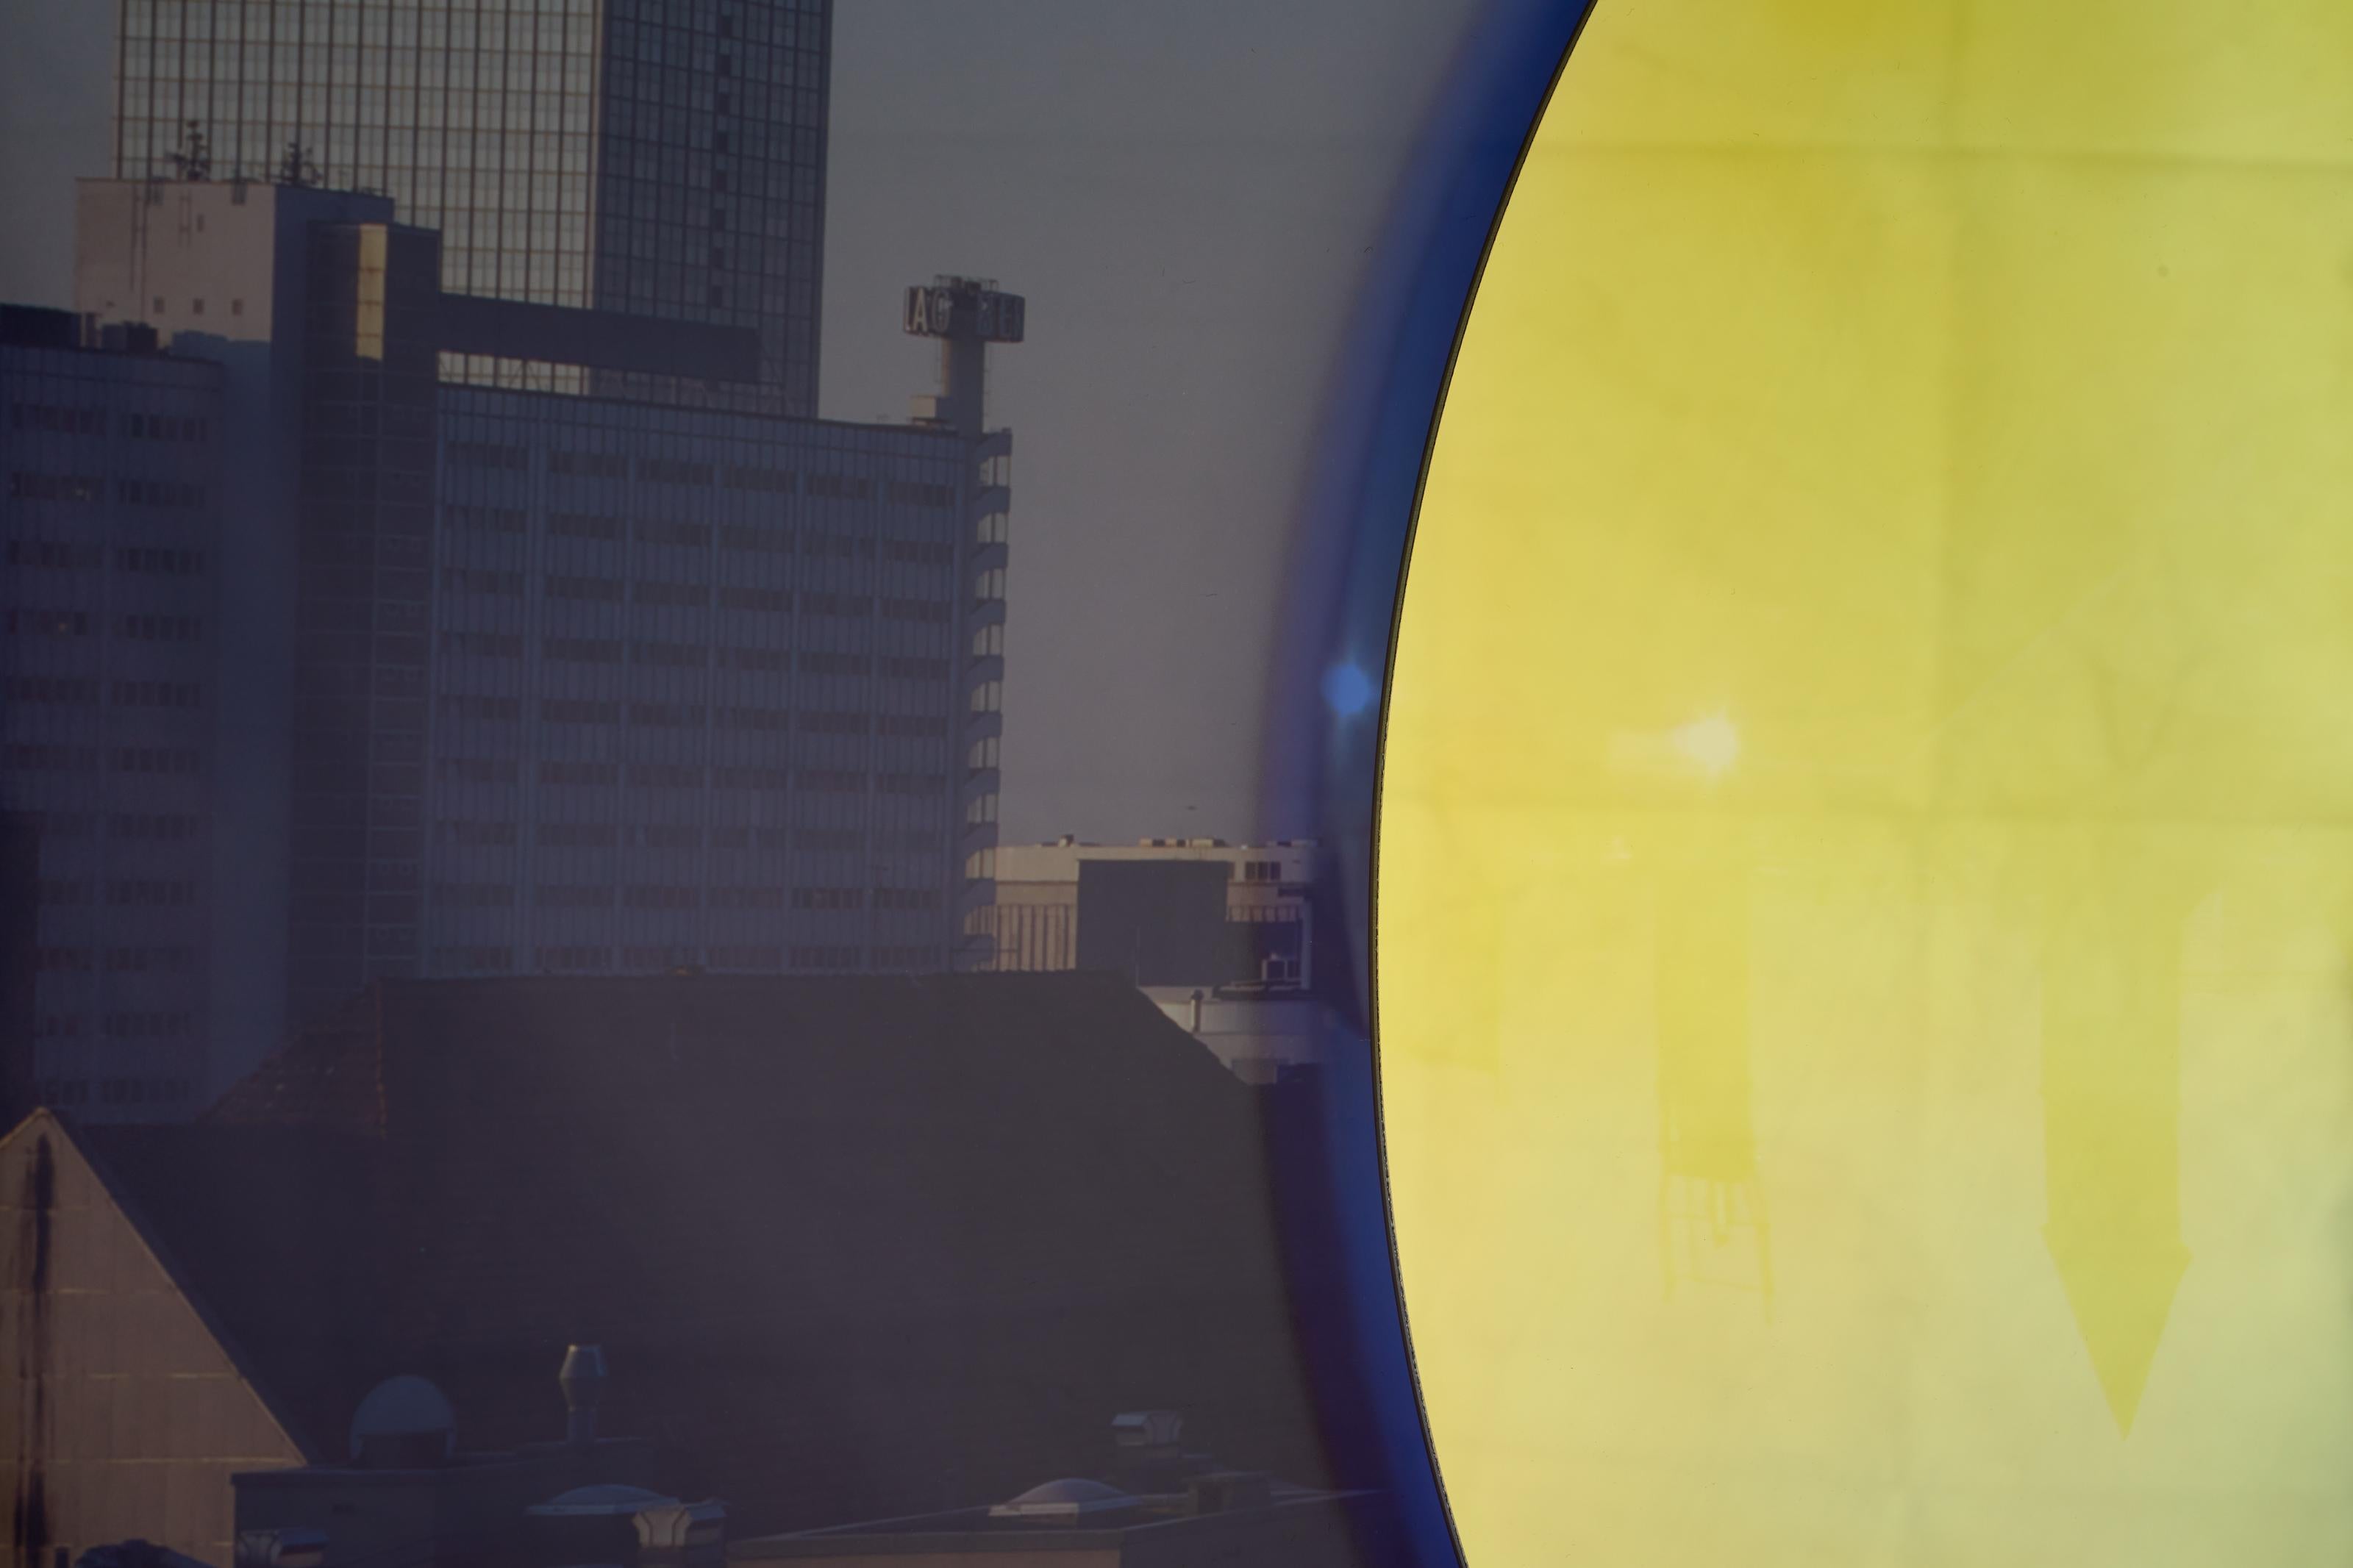 Your reversed Berlin sphere - Contemporary Sculpture by Olafur Eliasson